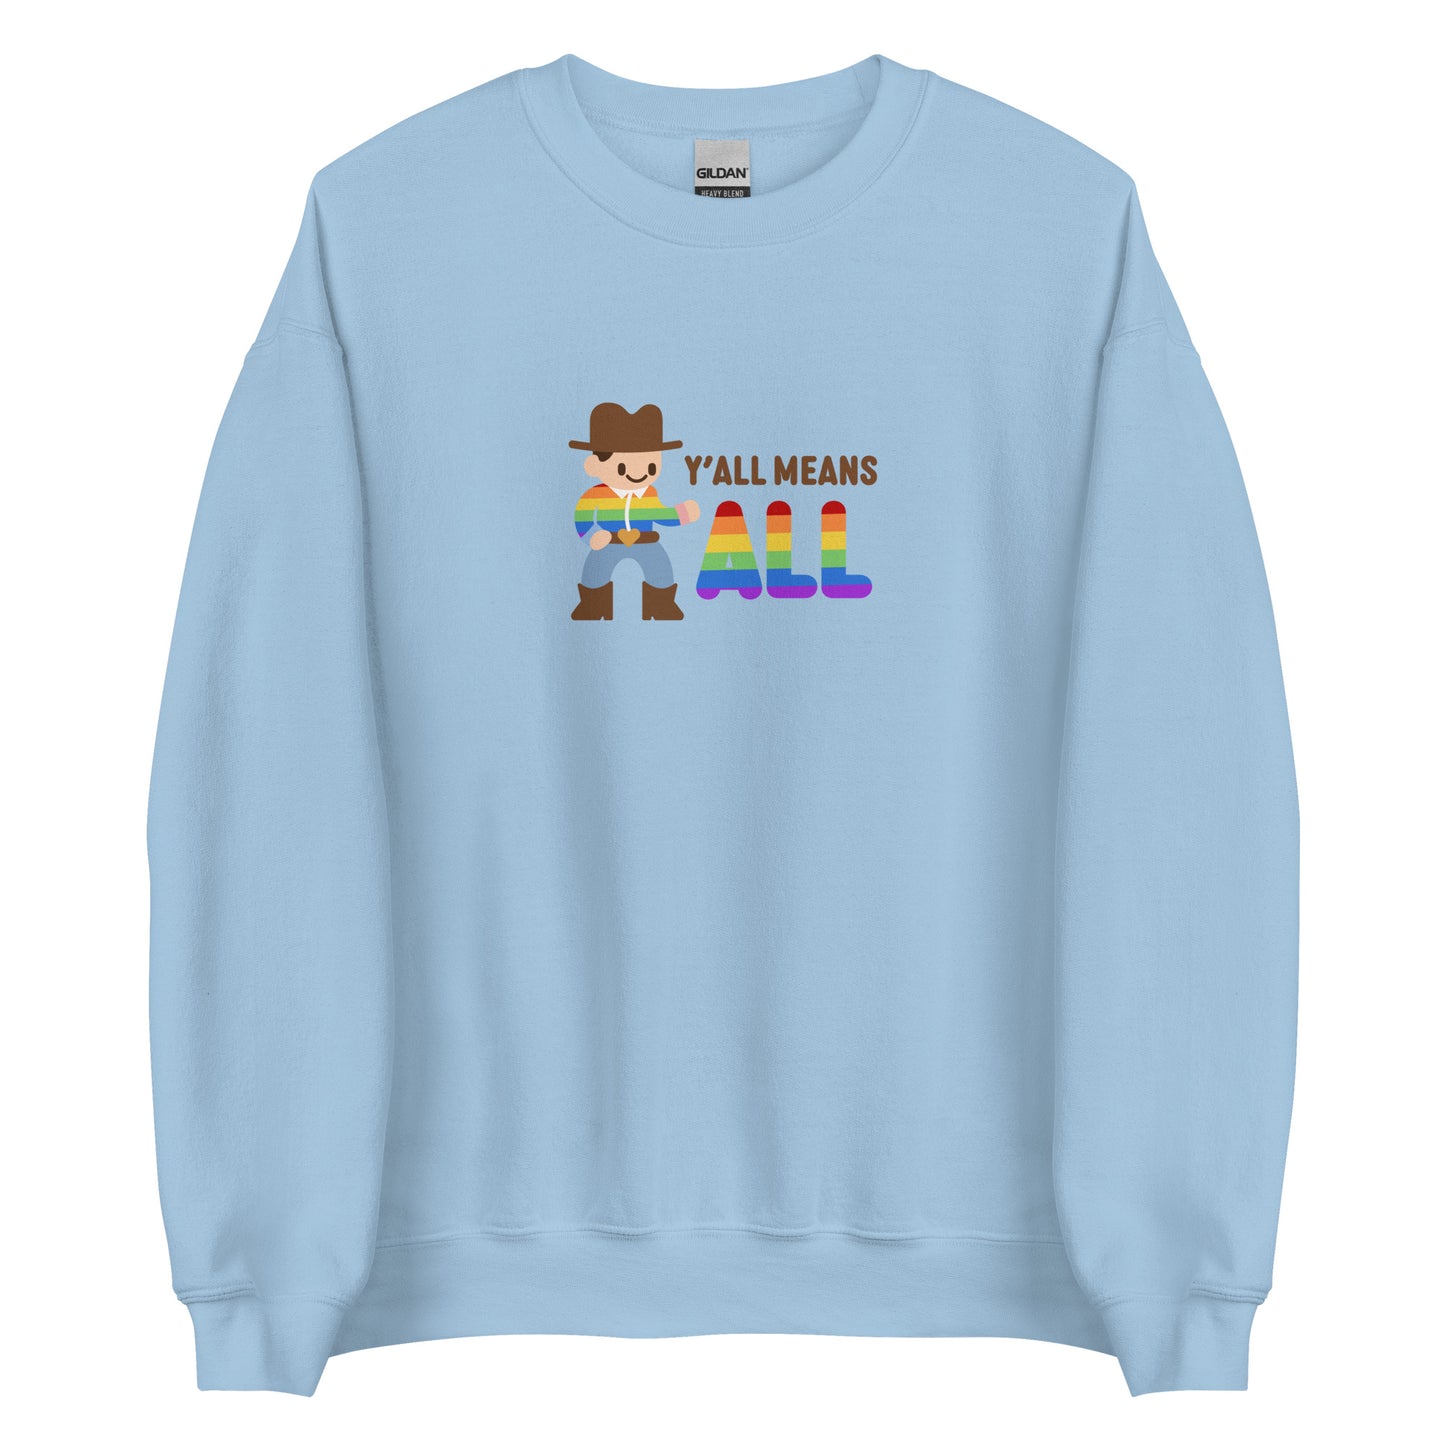 A light blue crewneck sweatshirt featuring an illustration of a smiling cowboy wearing a rainbow striped shirt. Text alongside the cowboy reads "Y'all means ALL". The word "ALL" is rainbow-colored to match the cowboy's shirt.